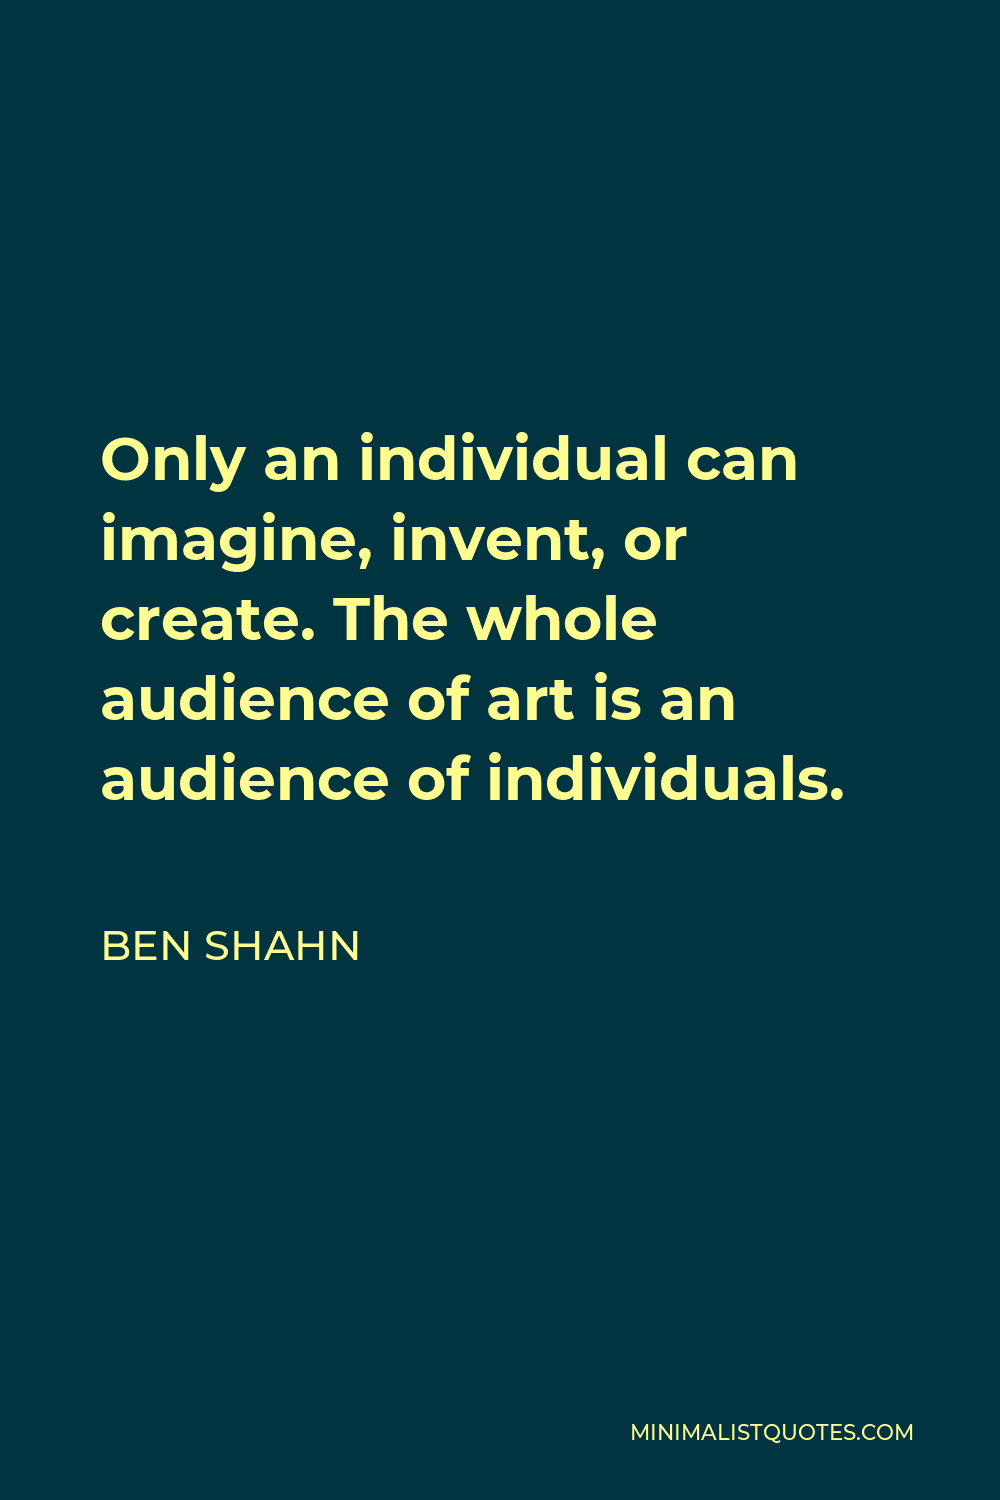 Ben Shahn Quote - Only an individual can imagine, invent, or create. The whole audience of art is an audience of individuals.